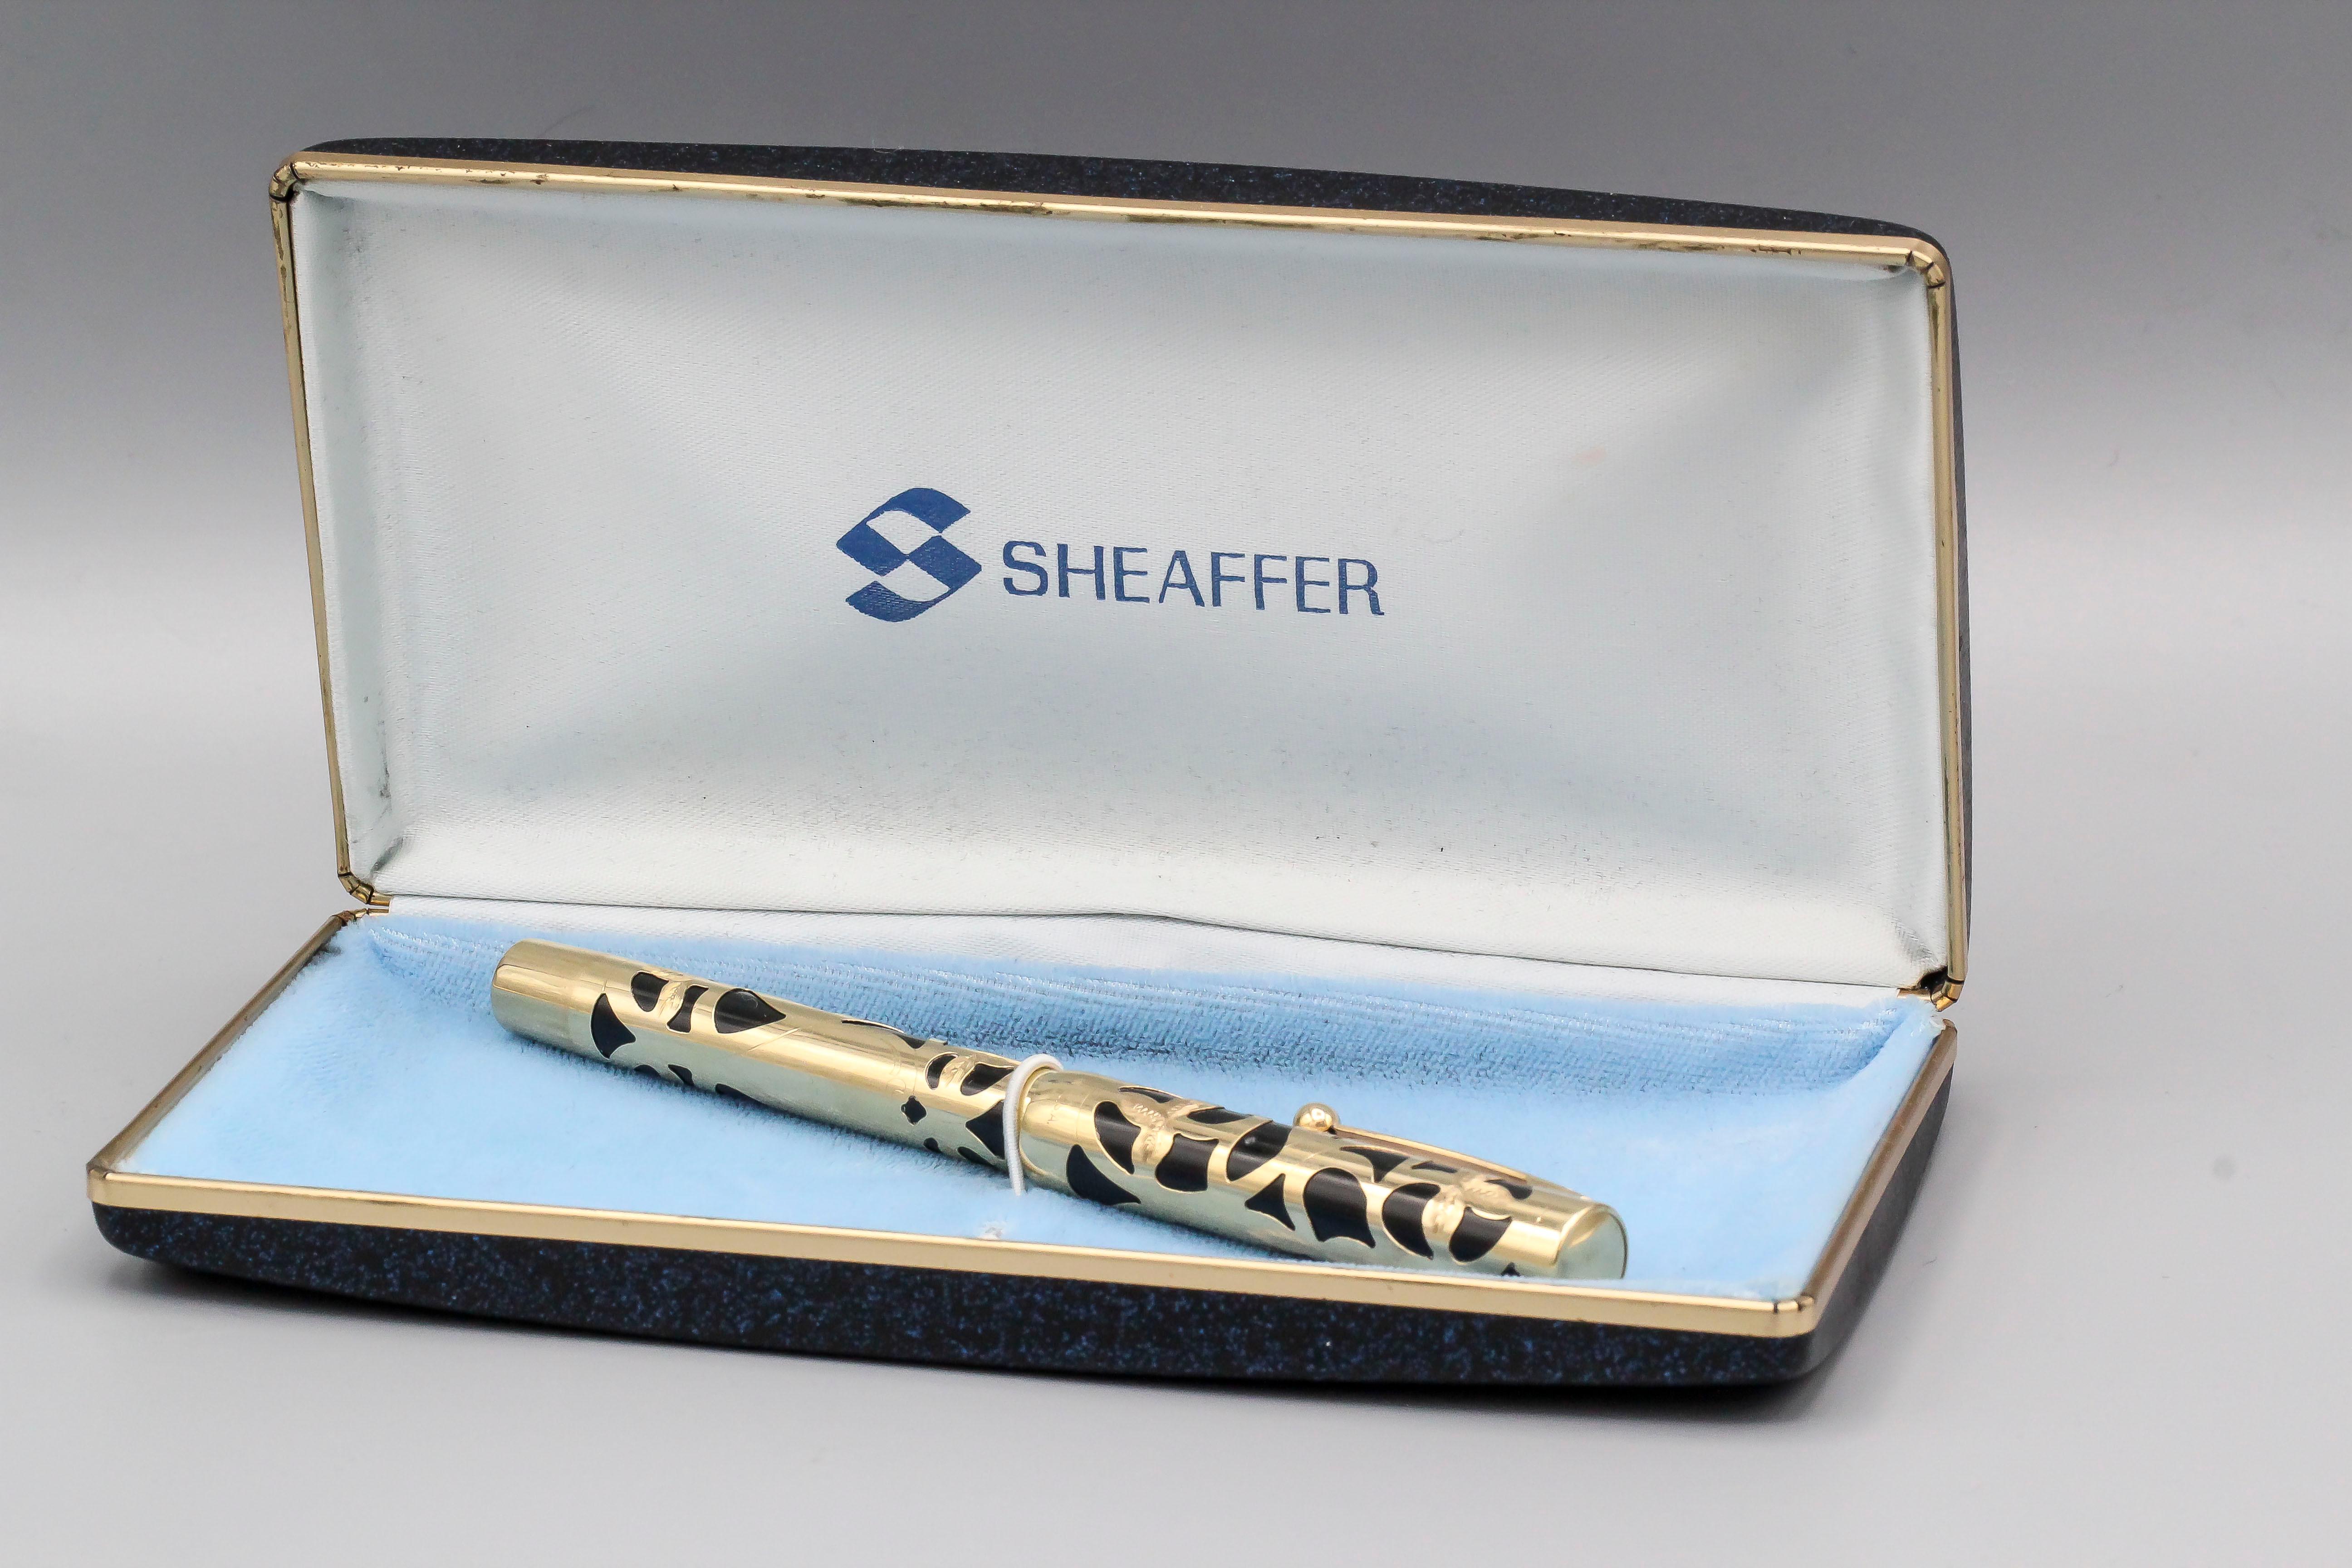 Elegant 14K yellow gold fountain pen by Sheaffer, made in the USA.

Hallmarks: Sheaffer, 14K, Made in USA (on case and nib)